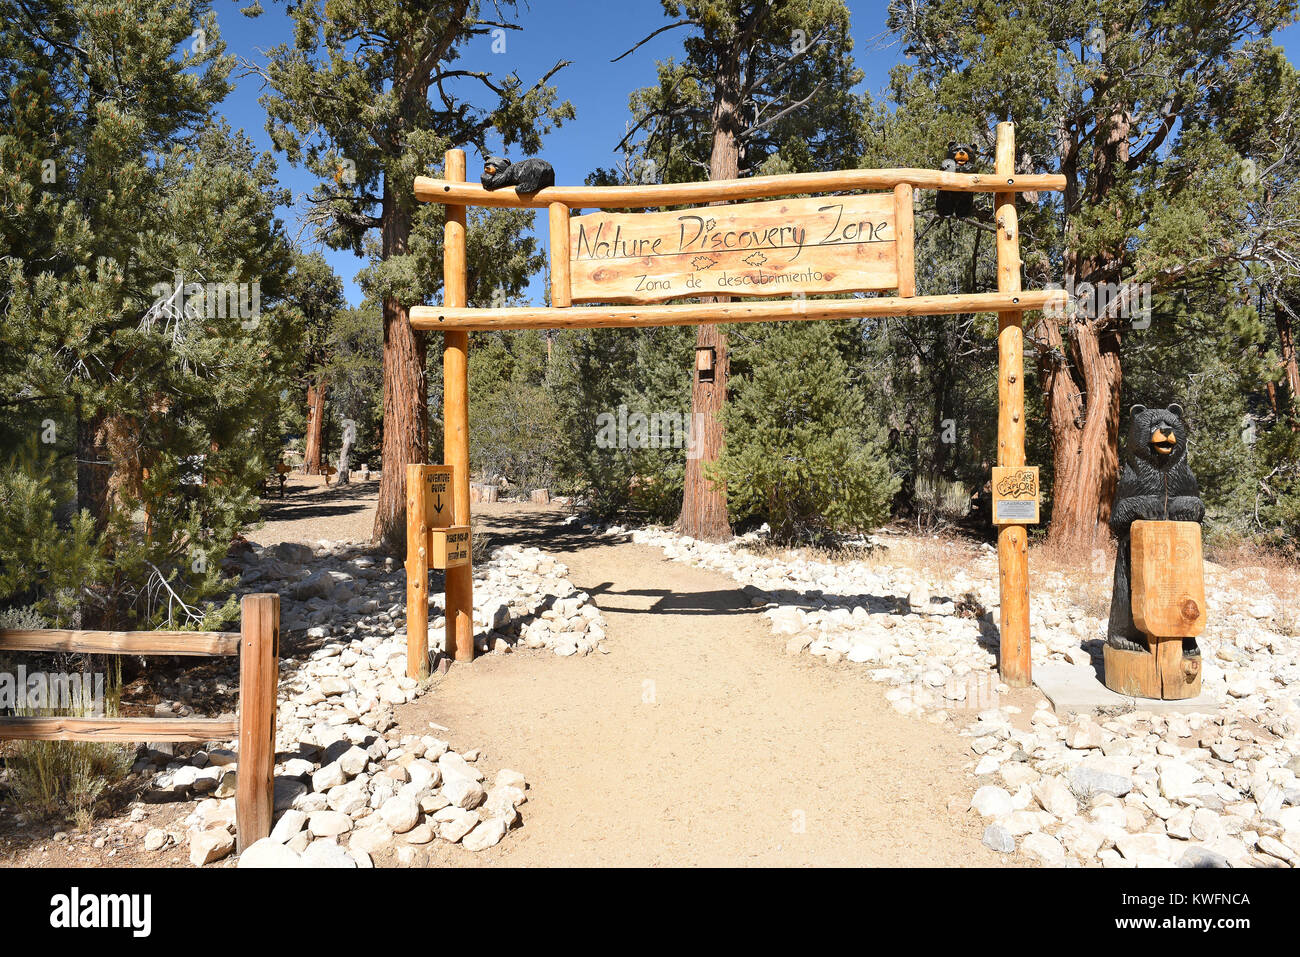 FAWNSKIN, CALIFORNIA - SEPTEMBER 25, 2016: Nature Discover Zone. Outdoor education area at the Big Bear Discovery Center, at Big Bear Lake, California Stock Photo